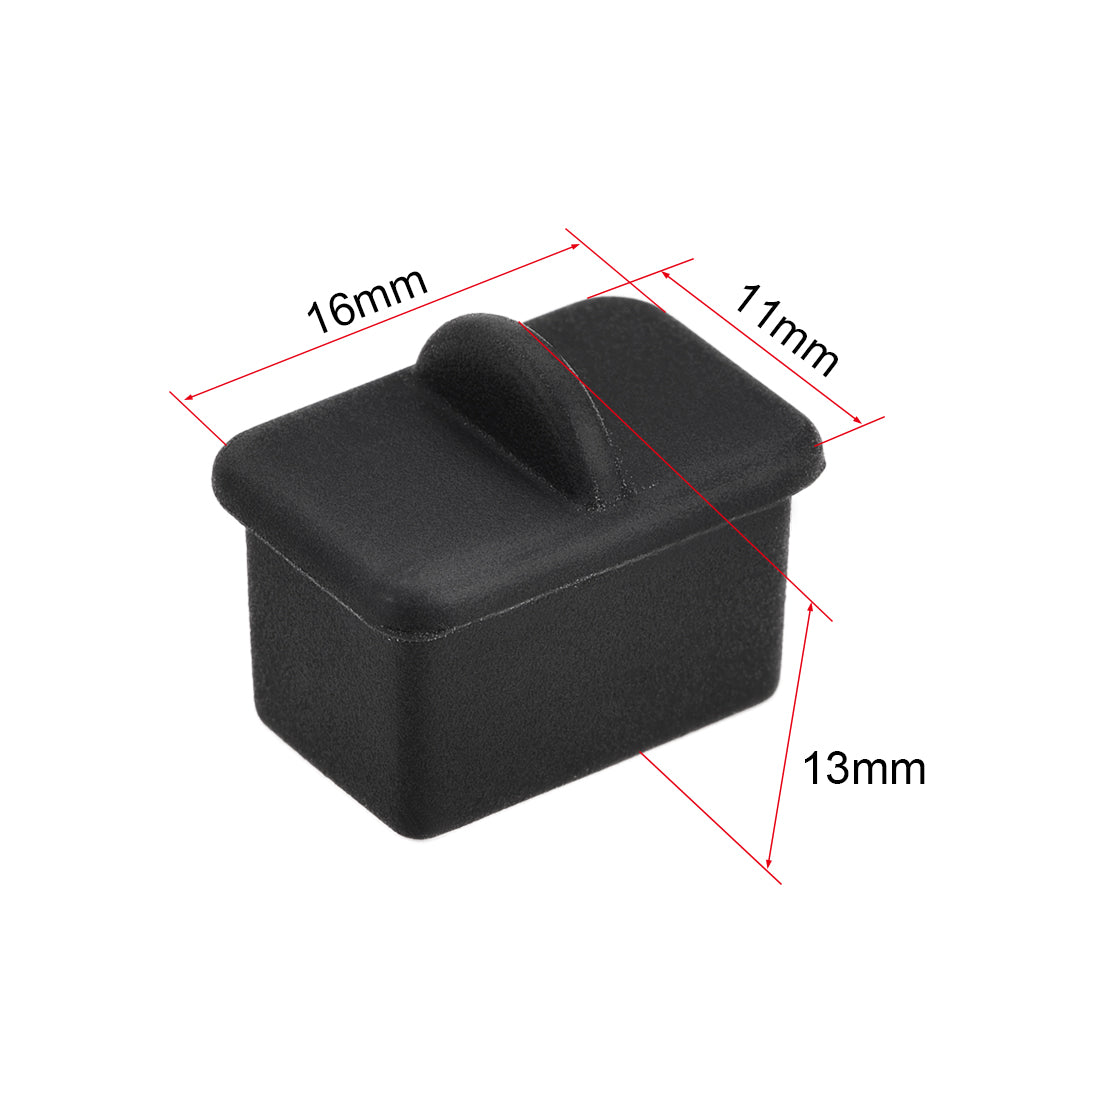 uxcell Uxcell SFP-A Port Anti-Dust Stopper Cap Cover Black Silicone 10pcs